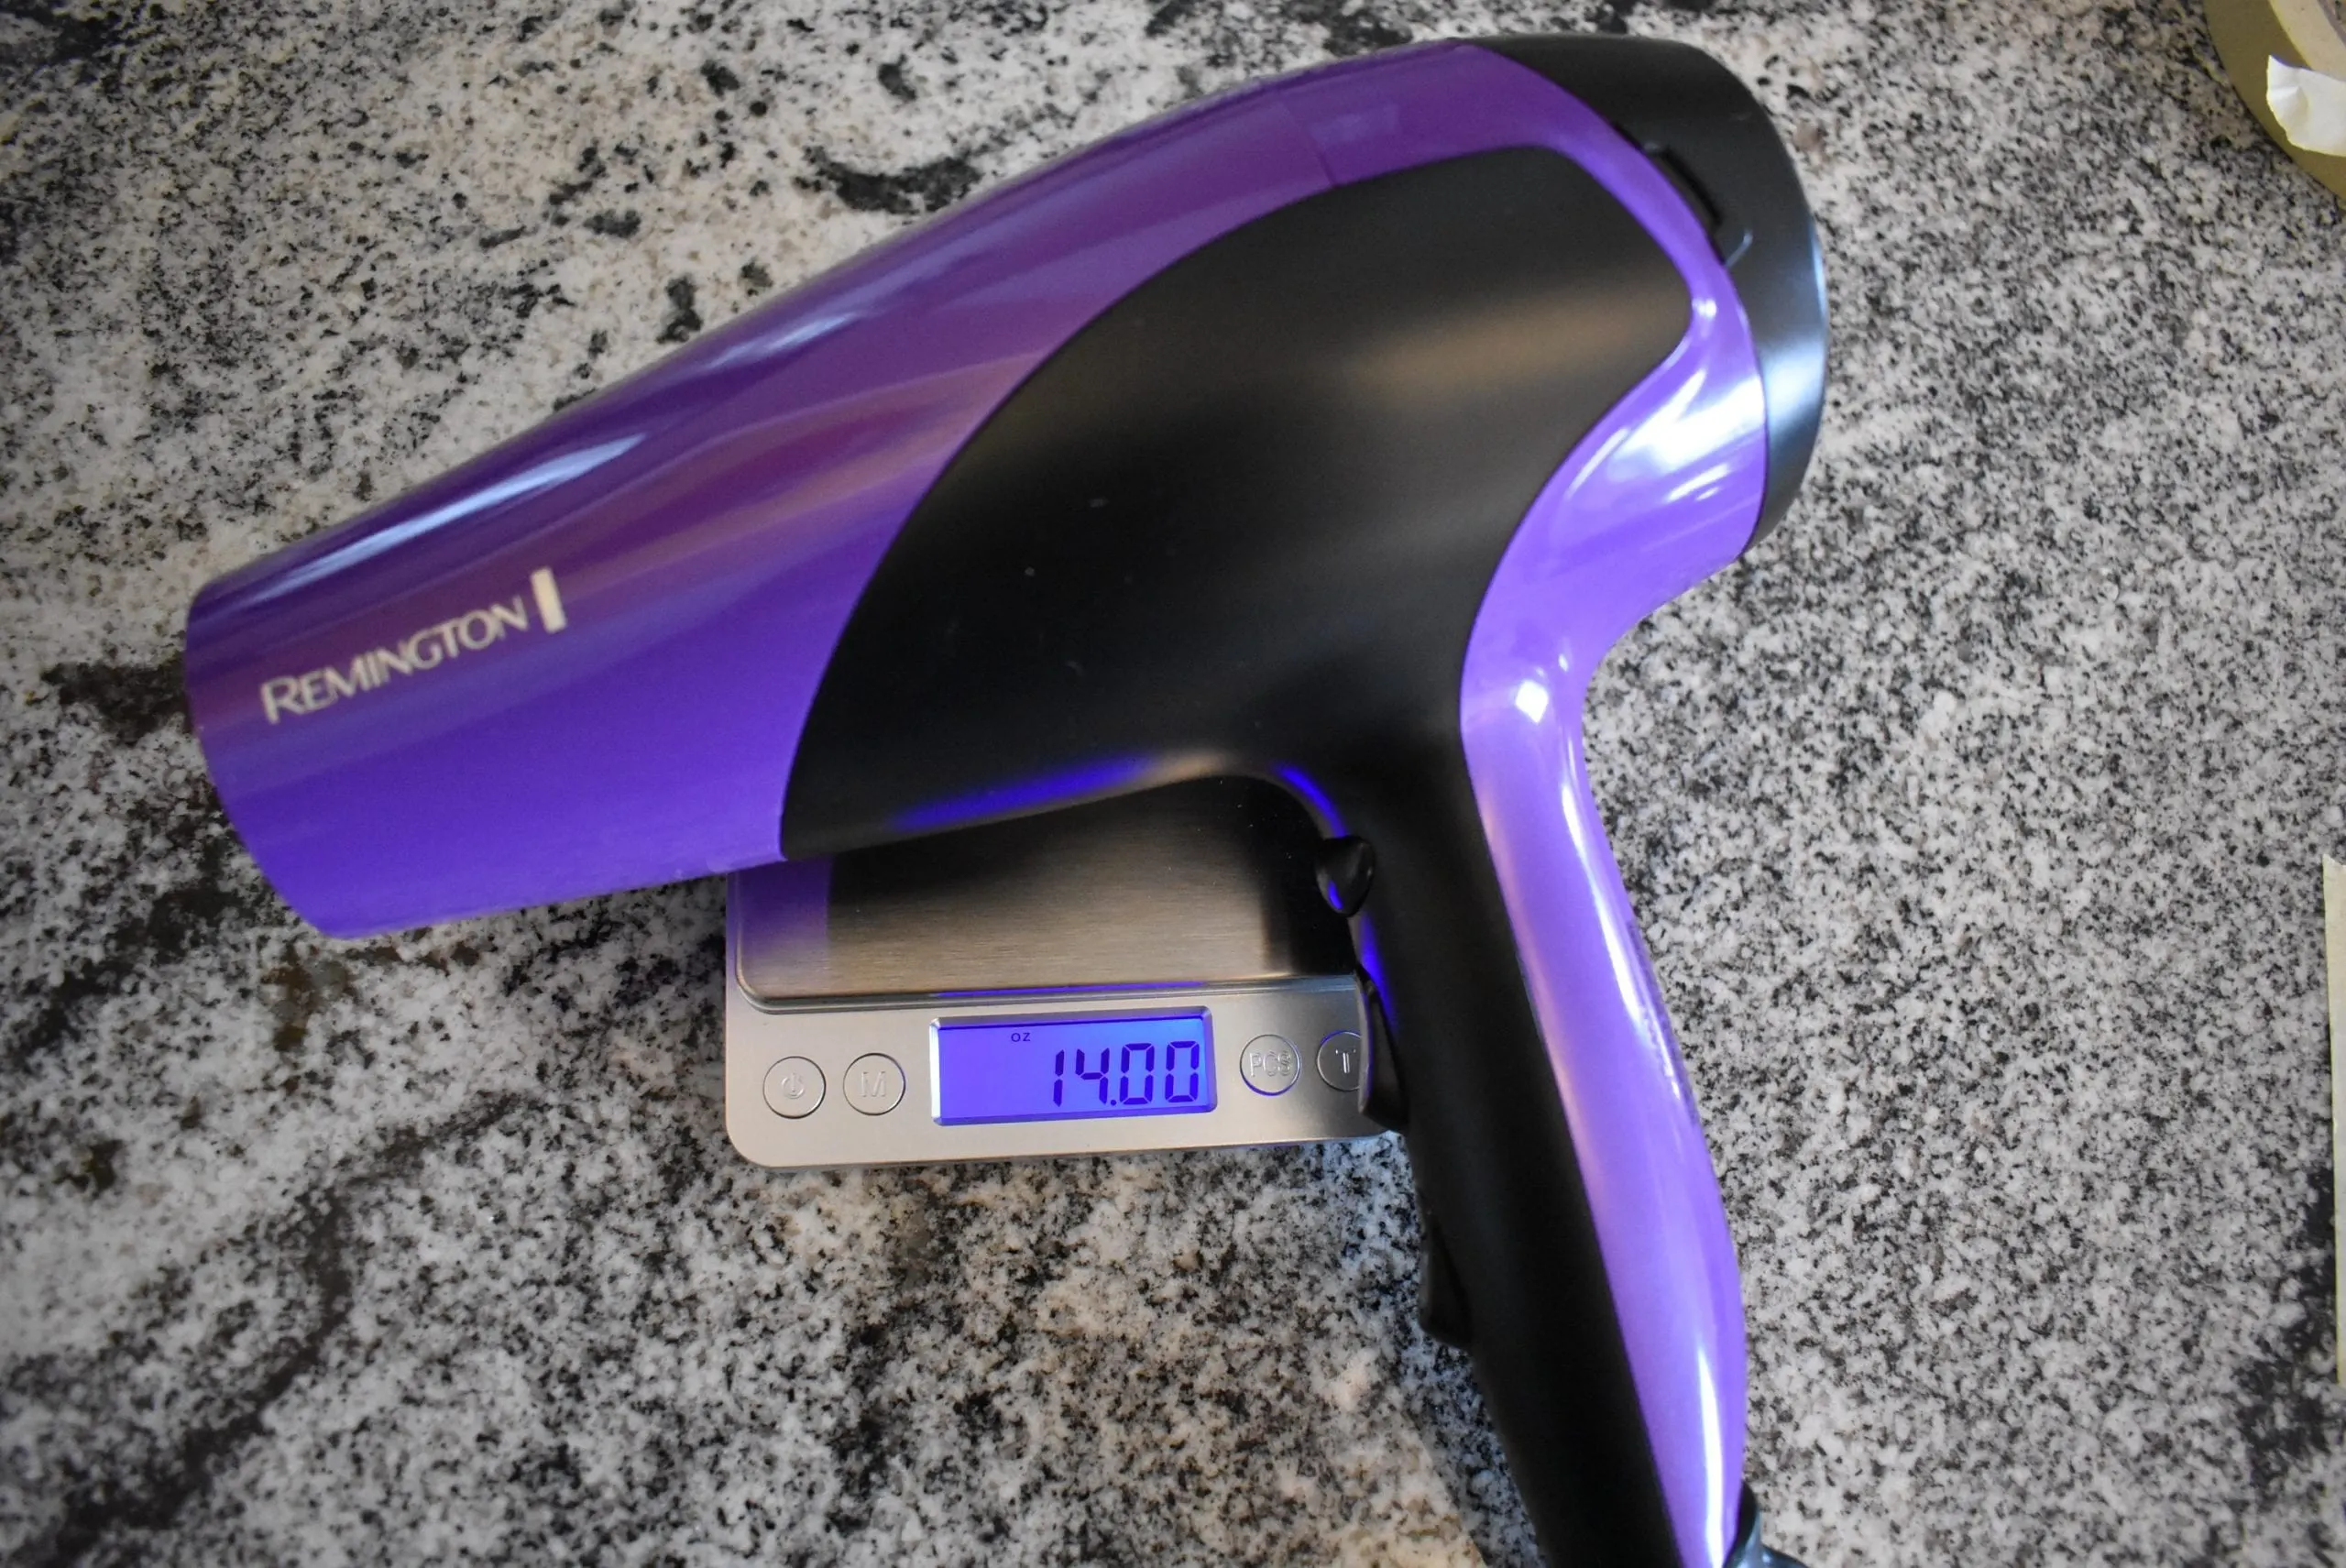 The Remington 3190 is one of the lightest hair dryers on our best hair dryer list